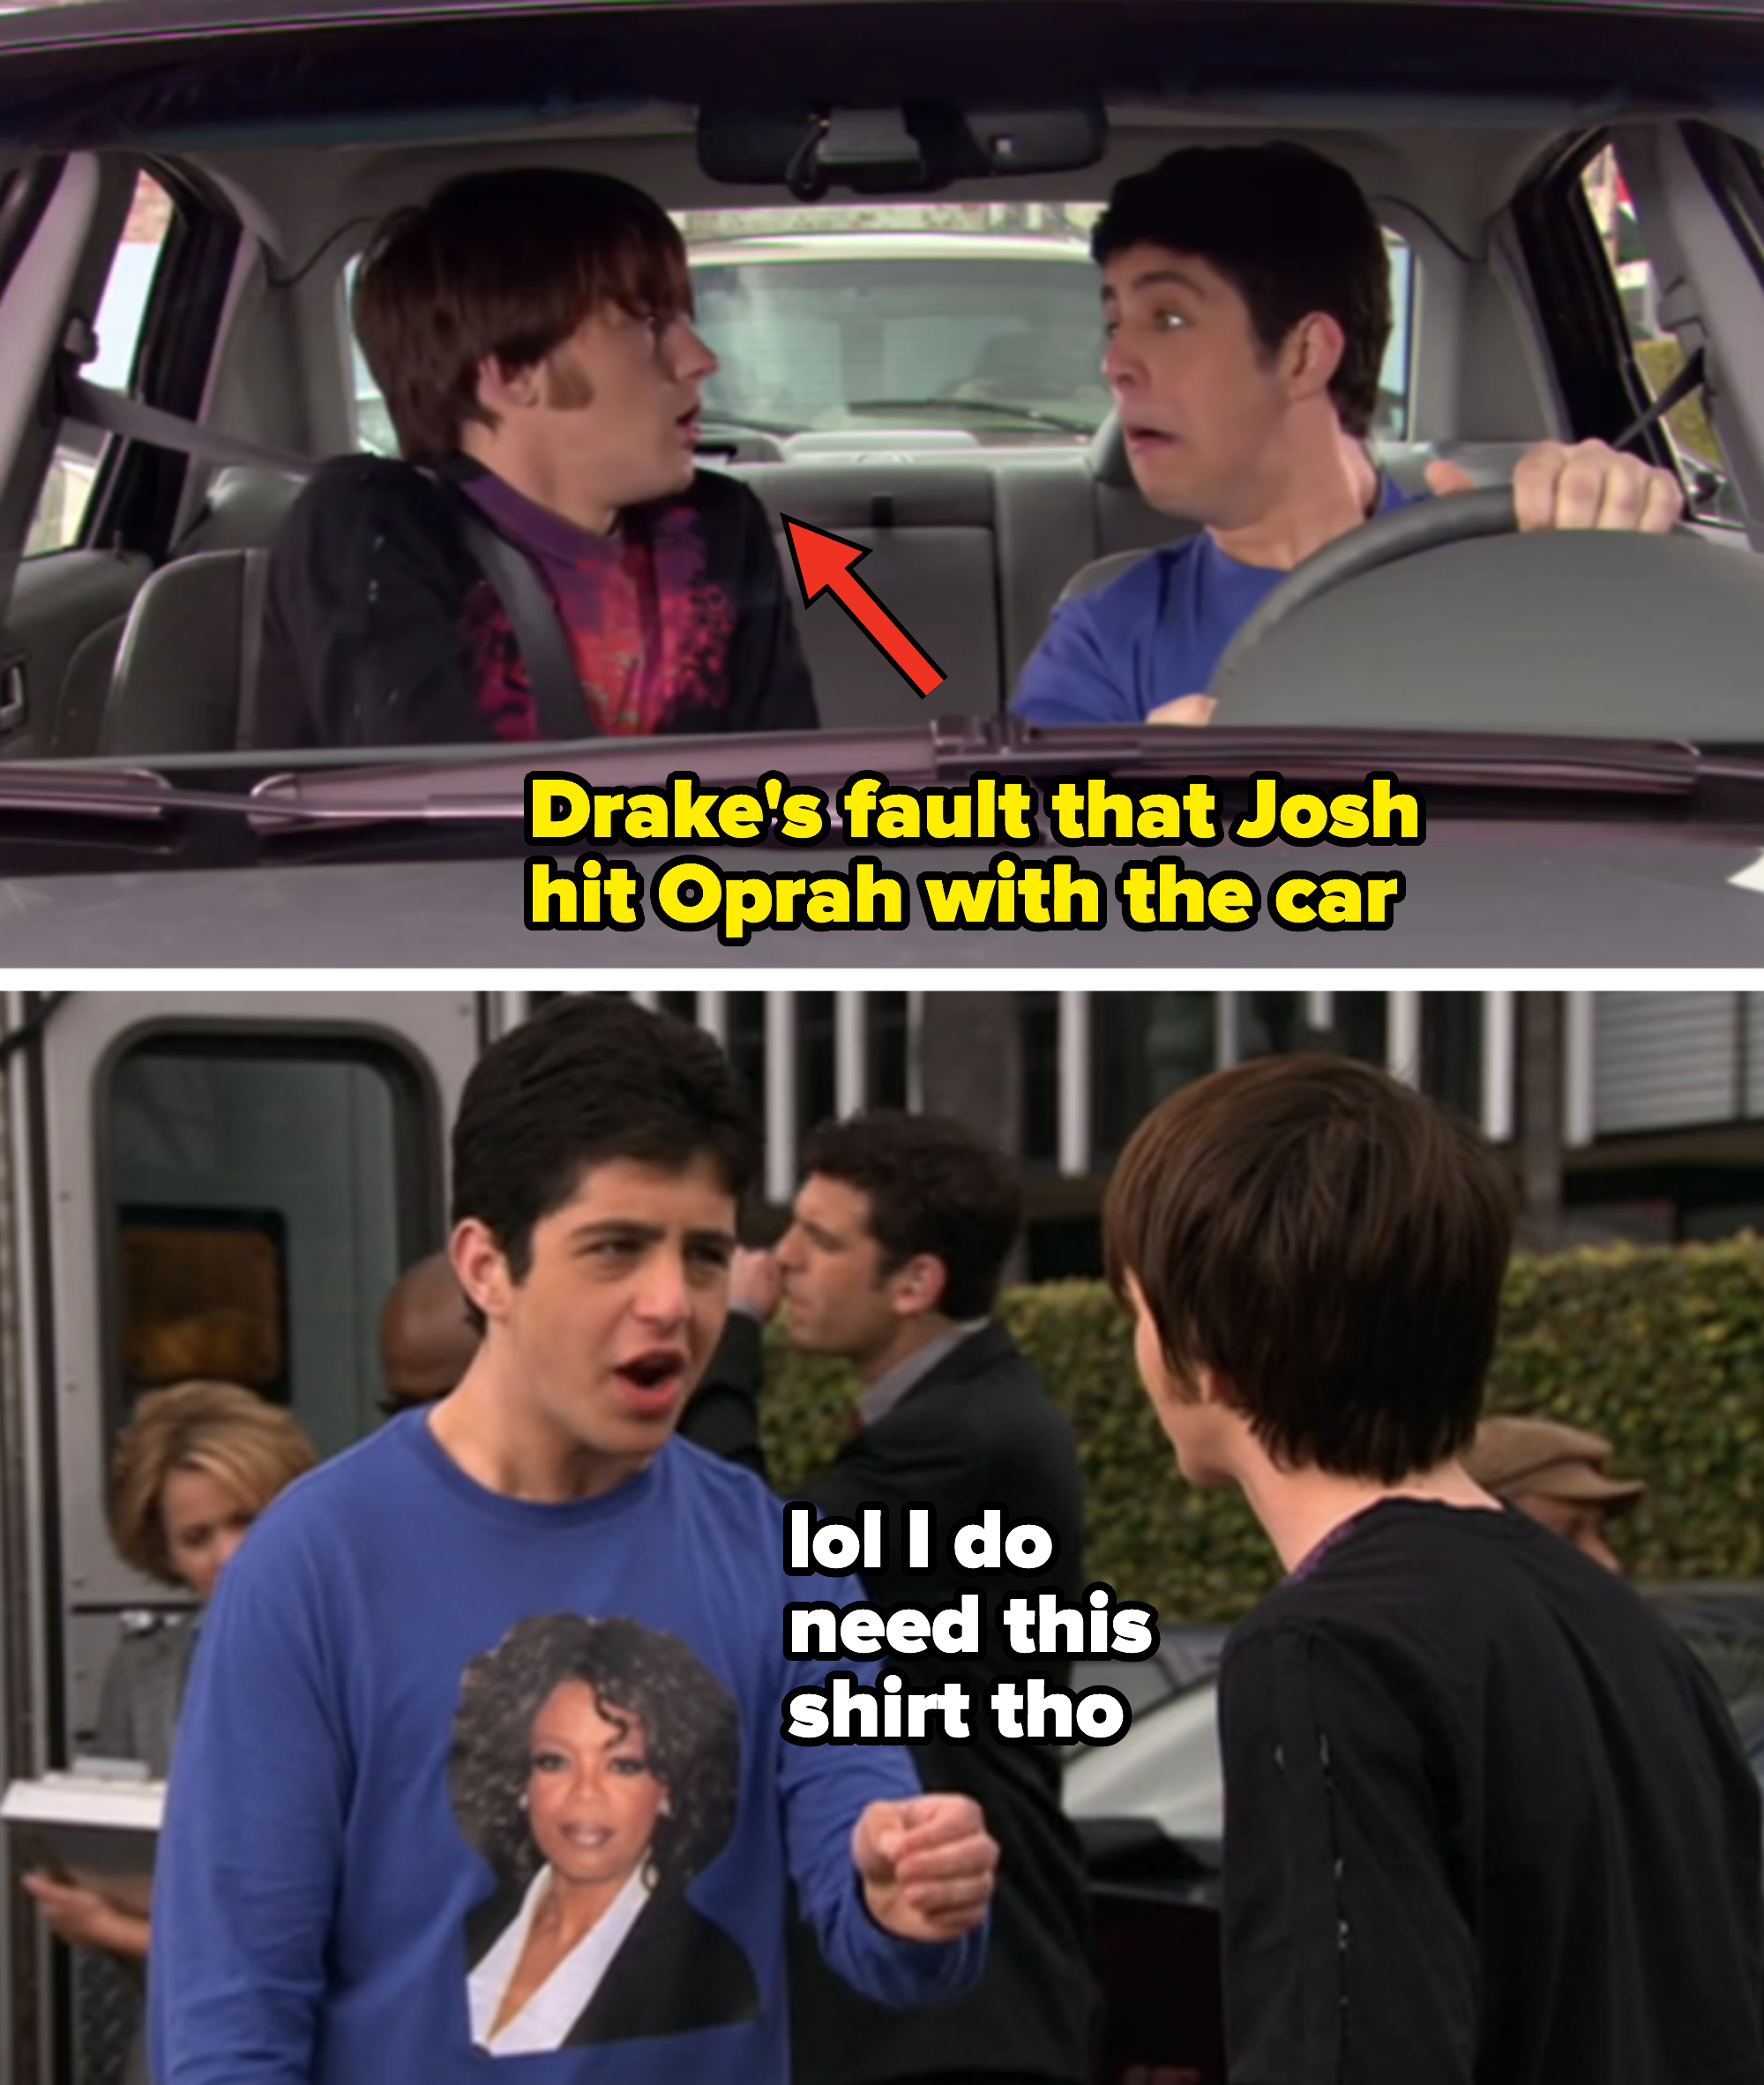 arrow pointing at drake with text, drake's fault that josh hit oprah with the car